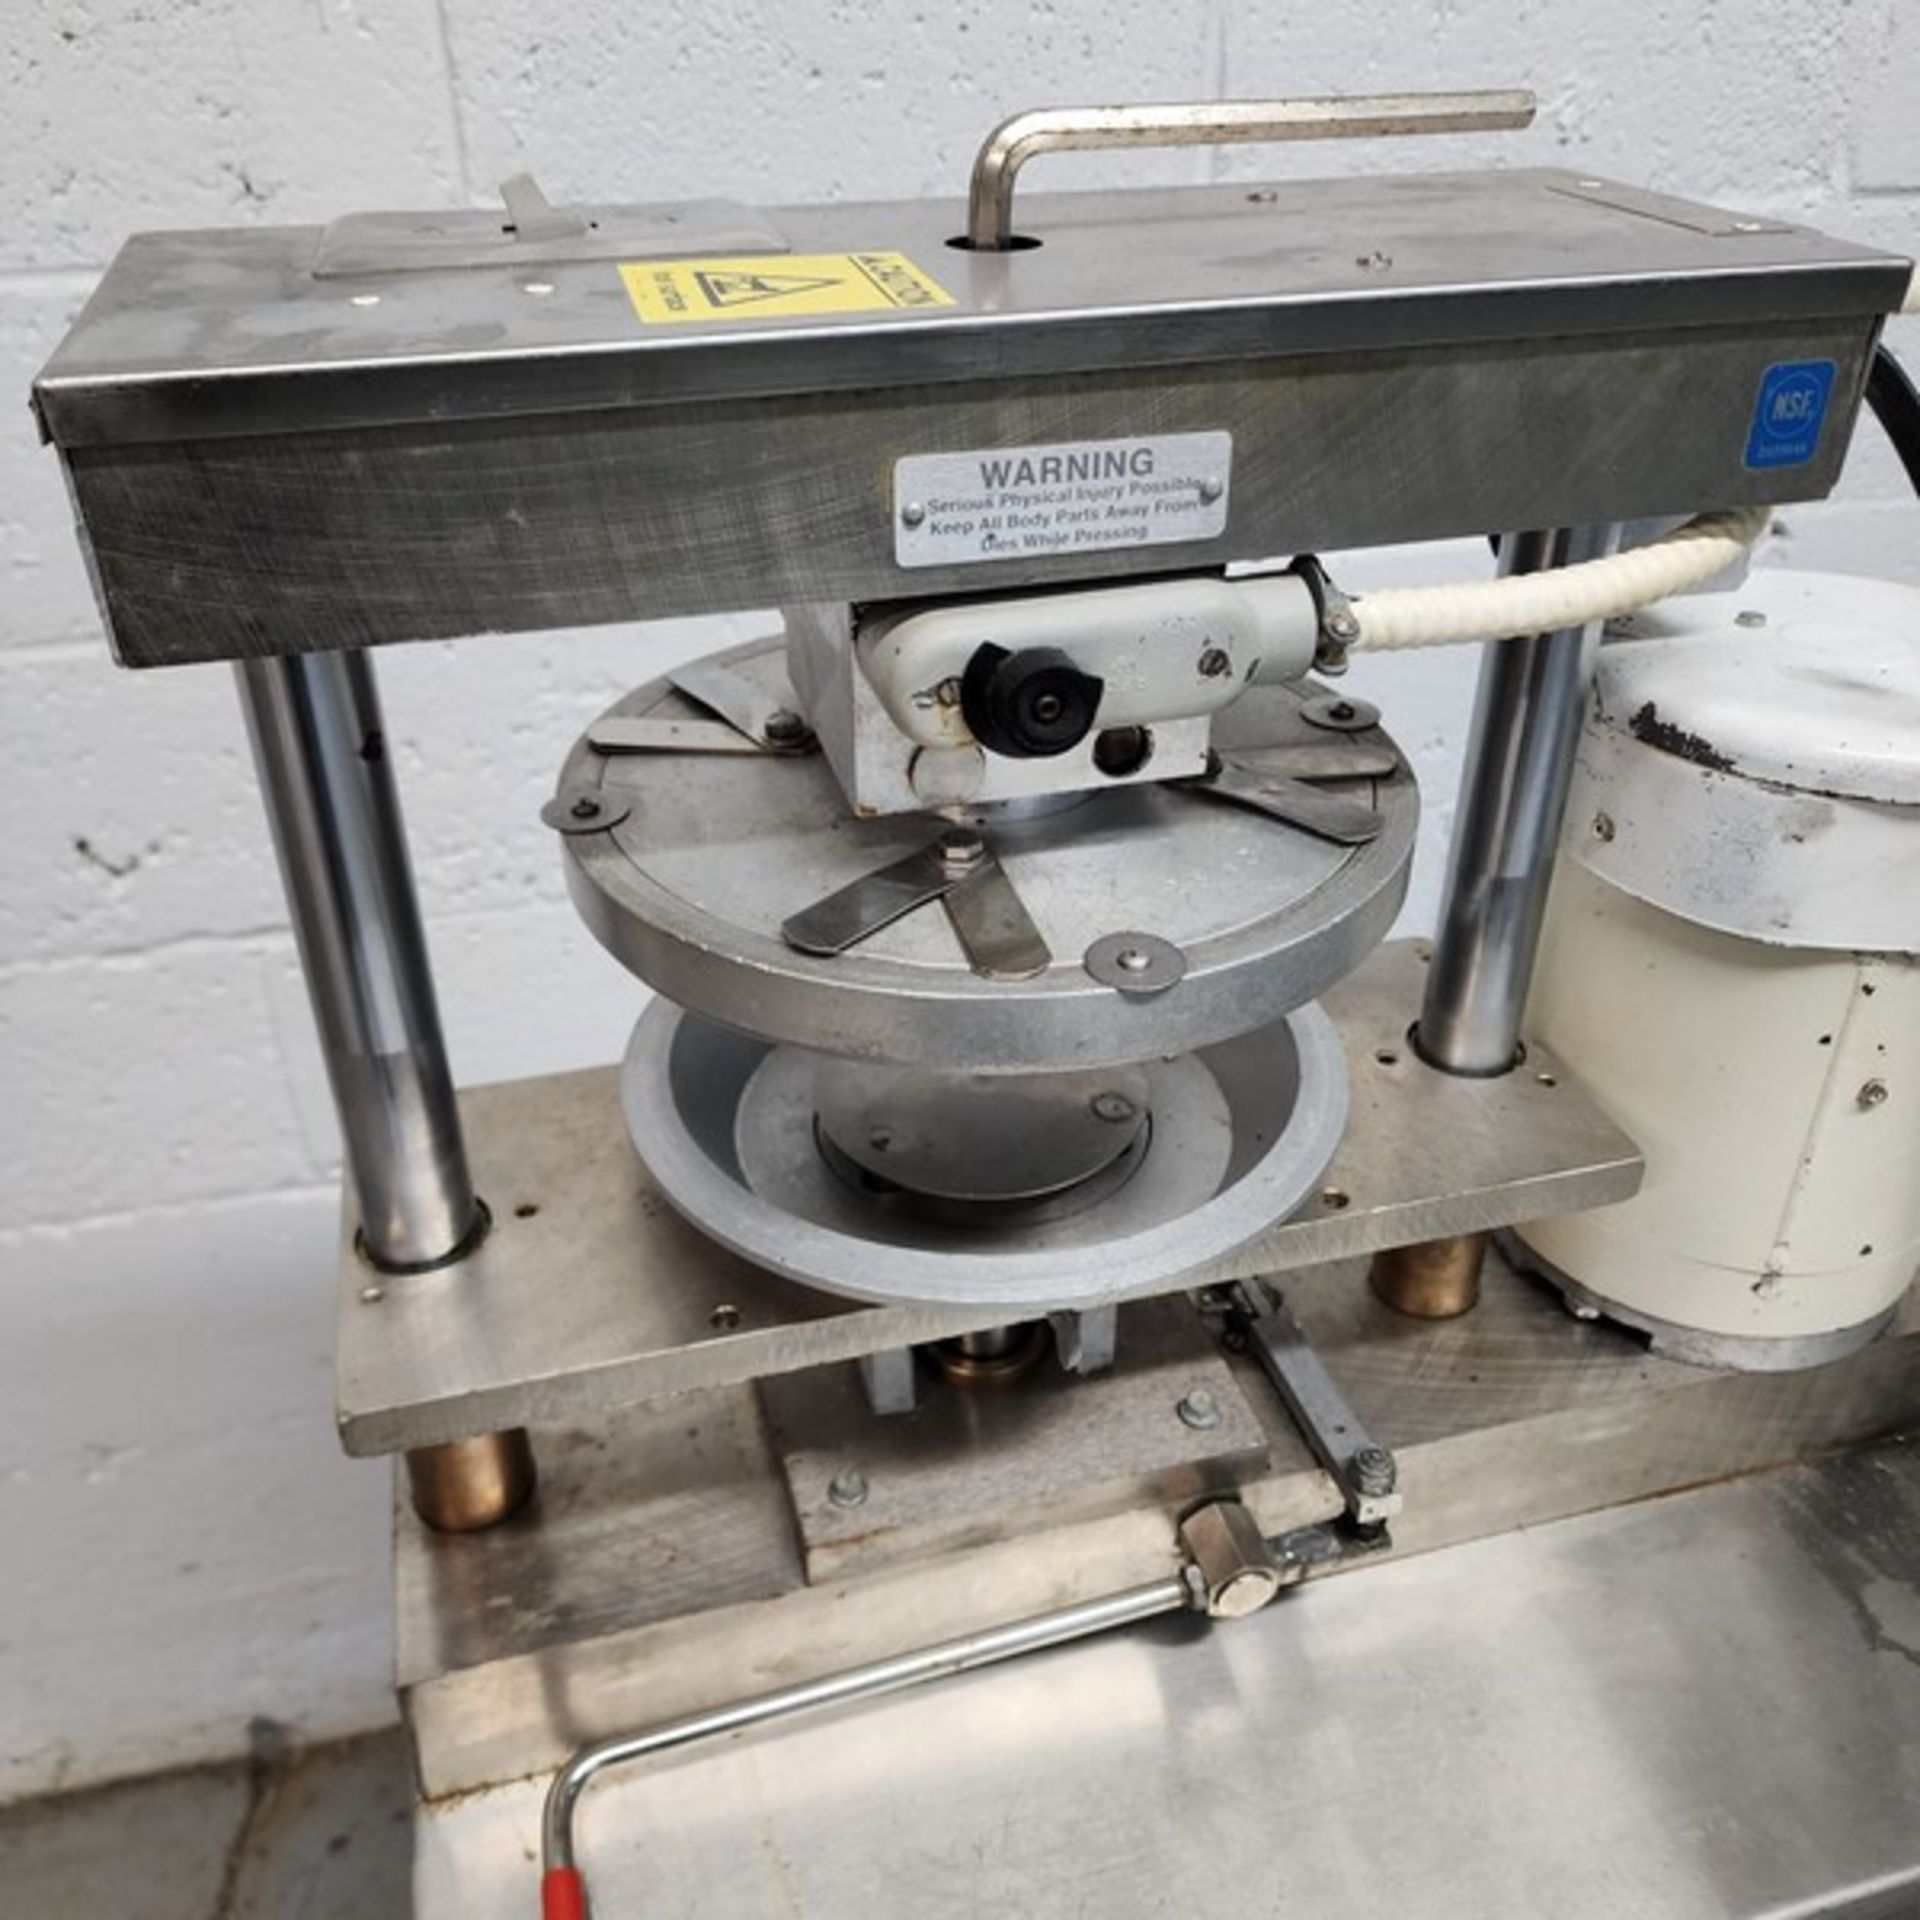 Comtec pie press model 1100 120 volts in good working condition (Item #103T) (Simple loading Fee $ - Image 6 of 6